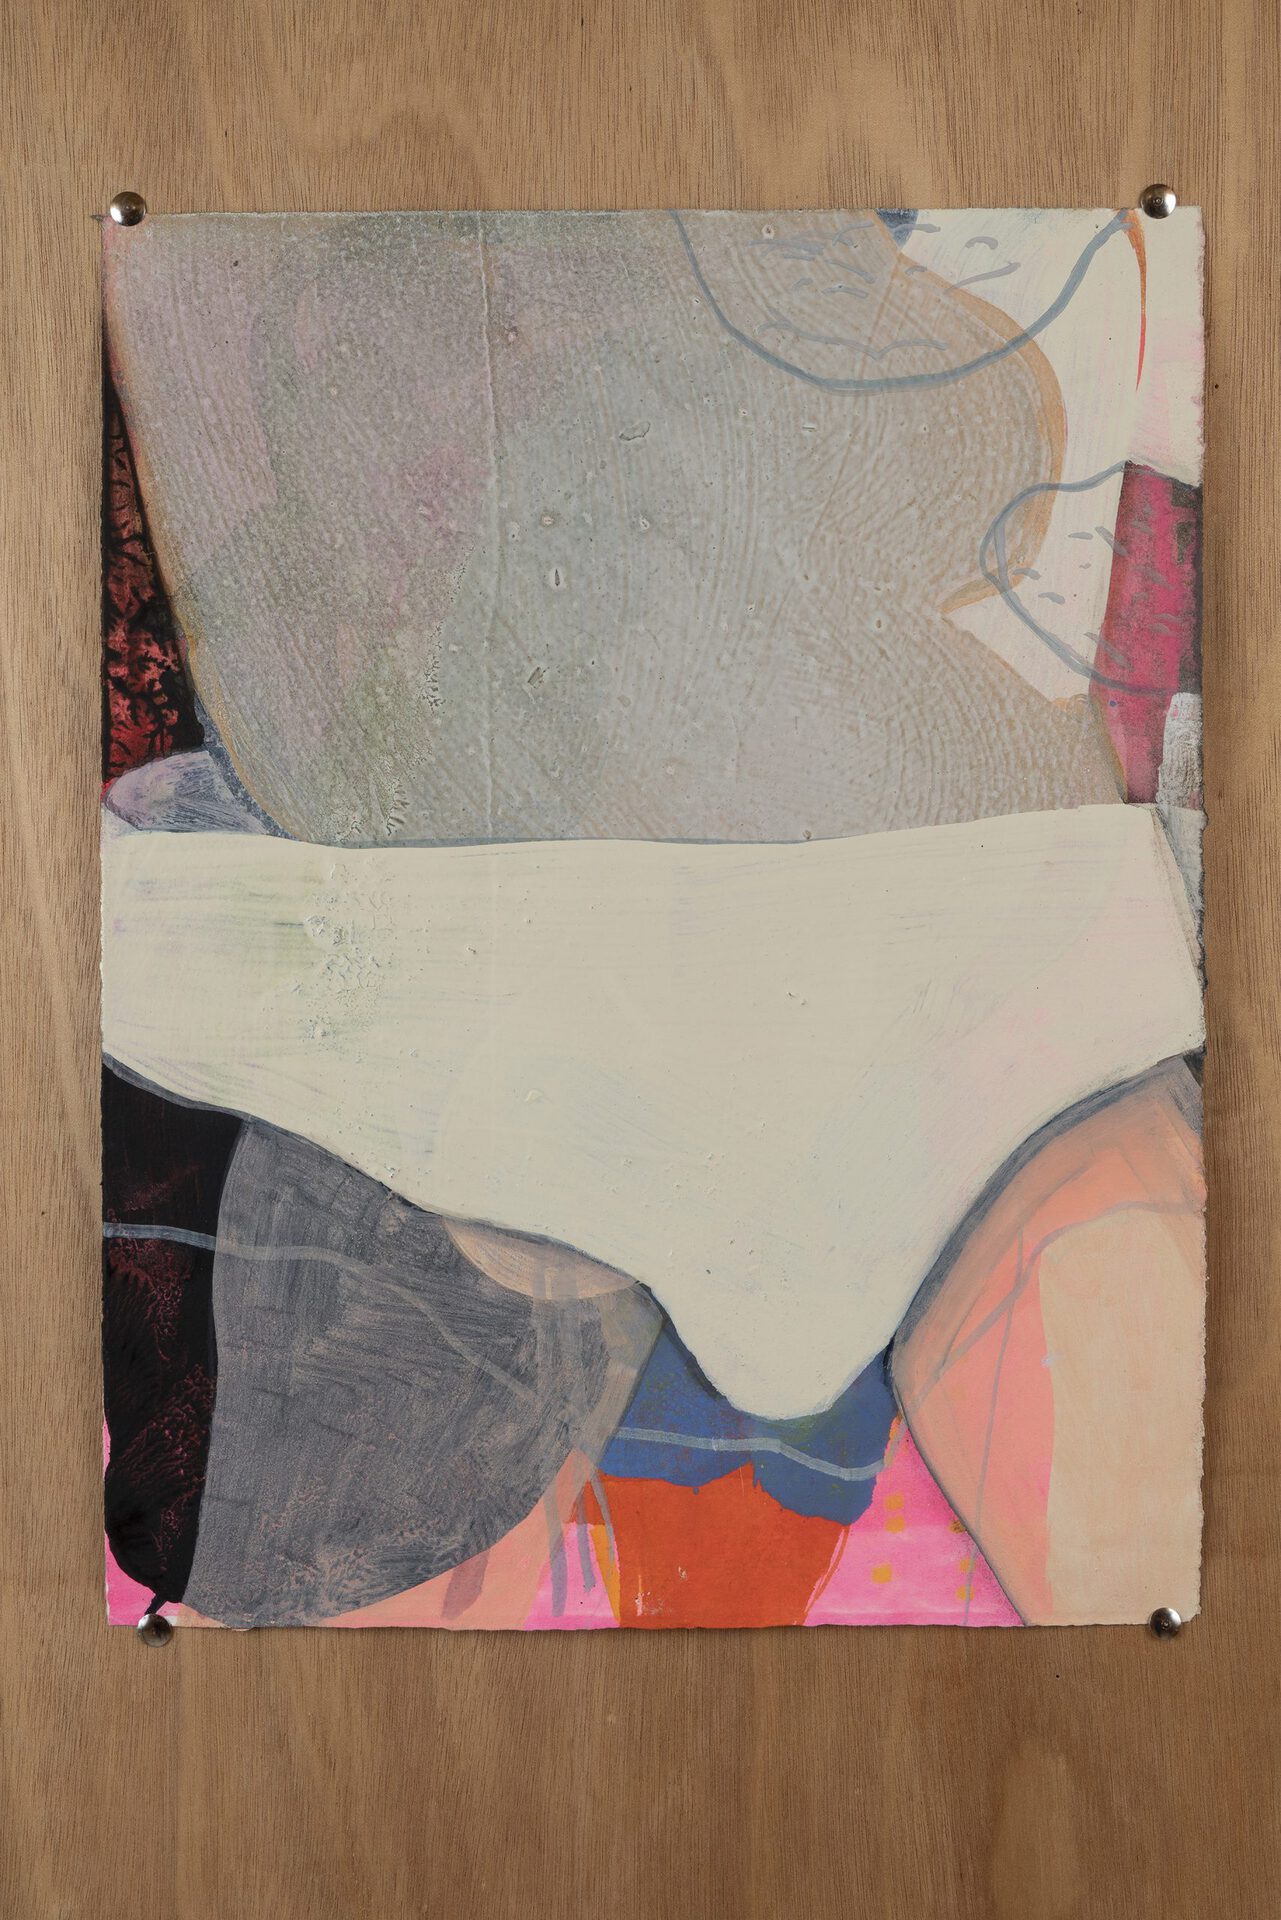 Michal Bachi, Underwear III, 2019. Industrial paint, acrylic, oil, paint marker on paper, 39.5 × 30.5 cm. Photo: Liat Elbling.